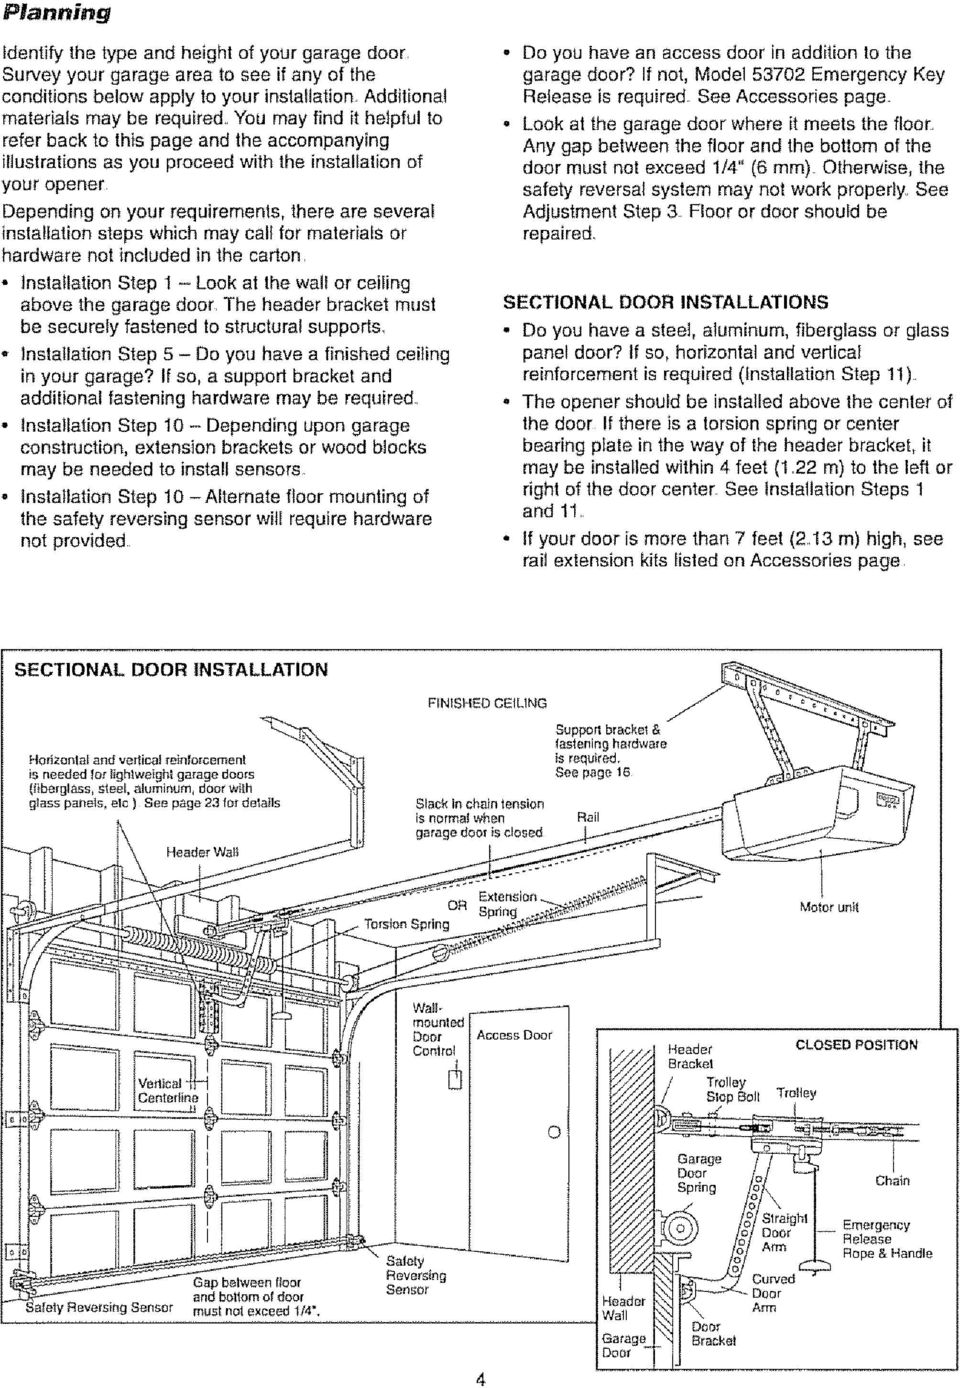 may calf for materials or hardware not included in the carton, Installation Step I - Look at the wall or ceiling above the garage door, The header bracket must be securely fastened to structural